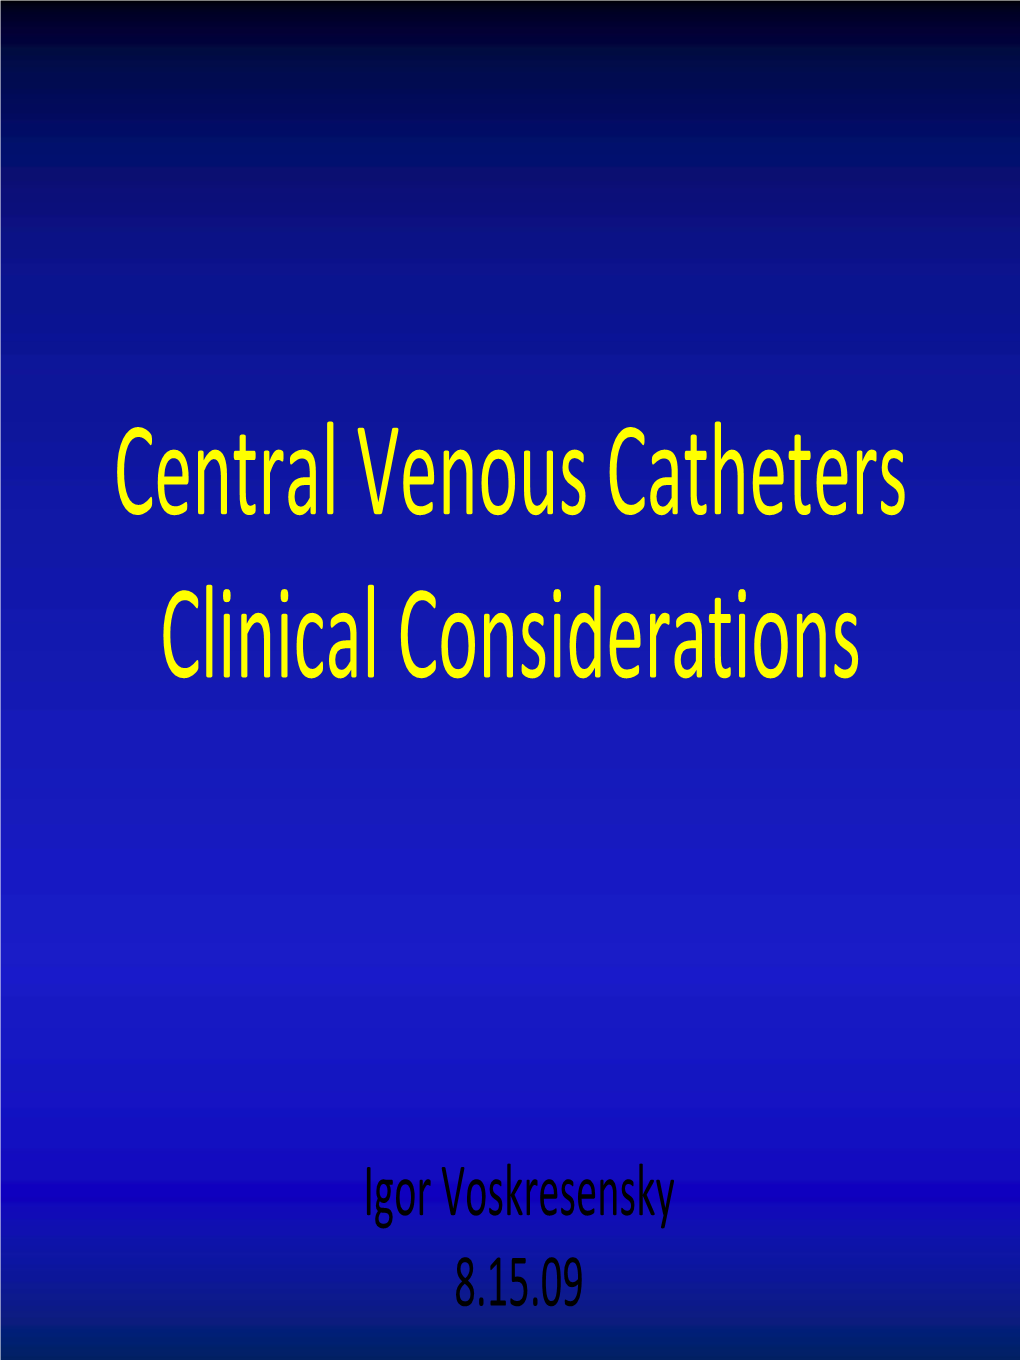 Central Venous Catheters Clinical Considerations